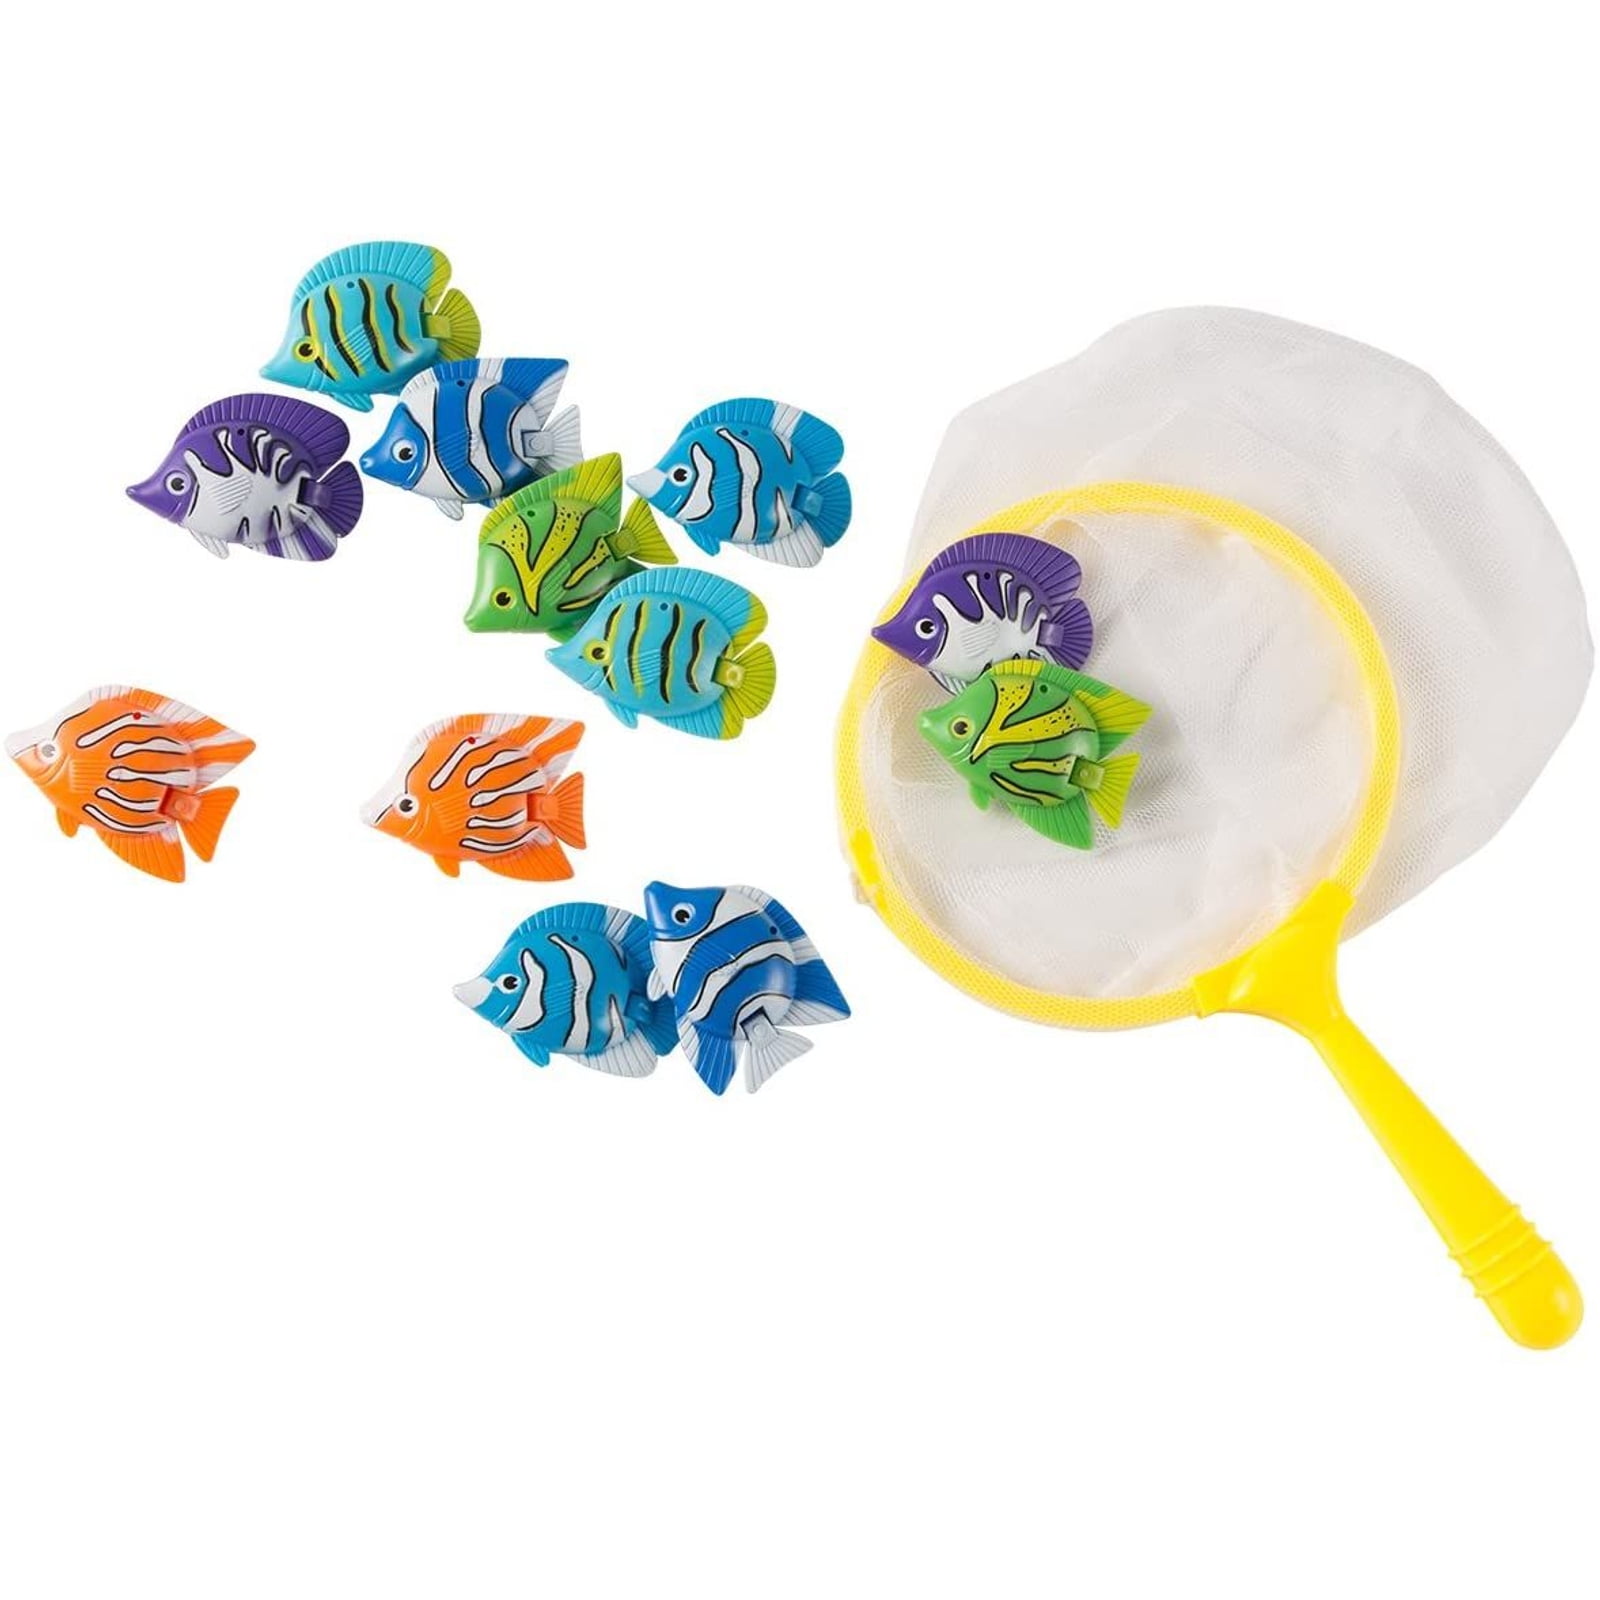 Shark Frenzy Catch a Fish Catch the Rings... Bundle of Anker Play Pool Toys 